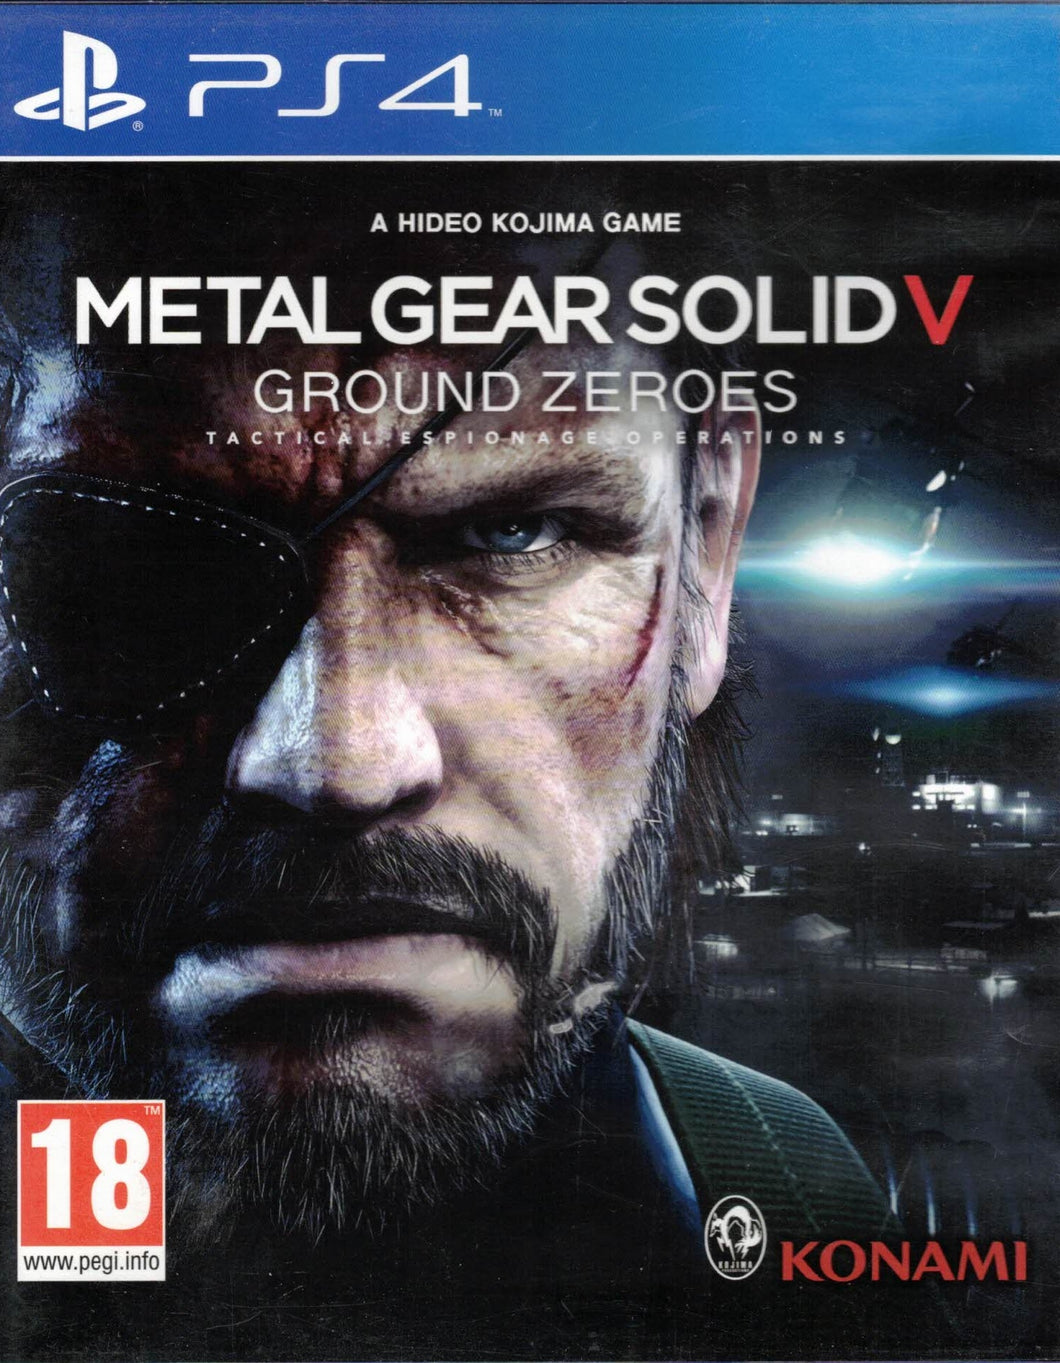 METAL GEAR SOLID V: GROUND ZEROES (PS4) (French Import) (good second-hand)